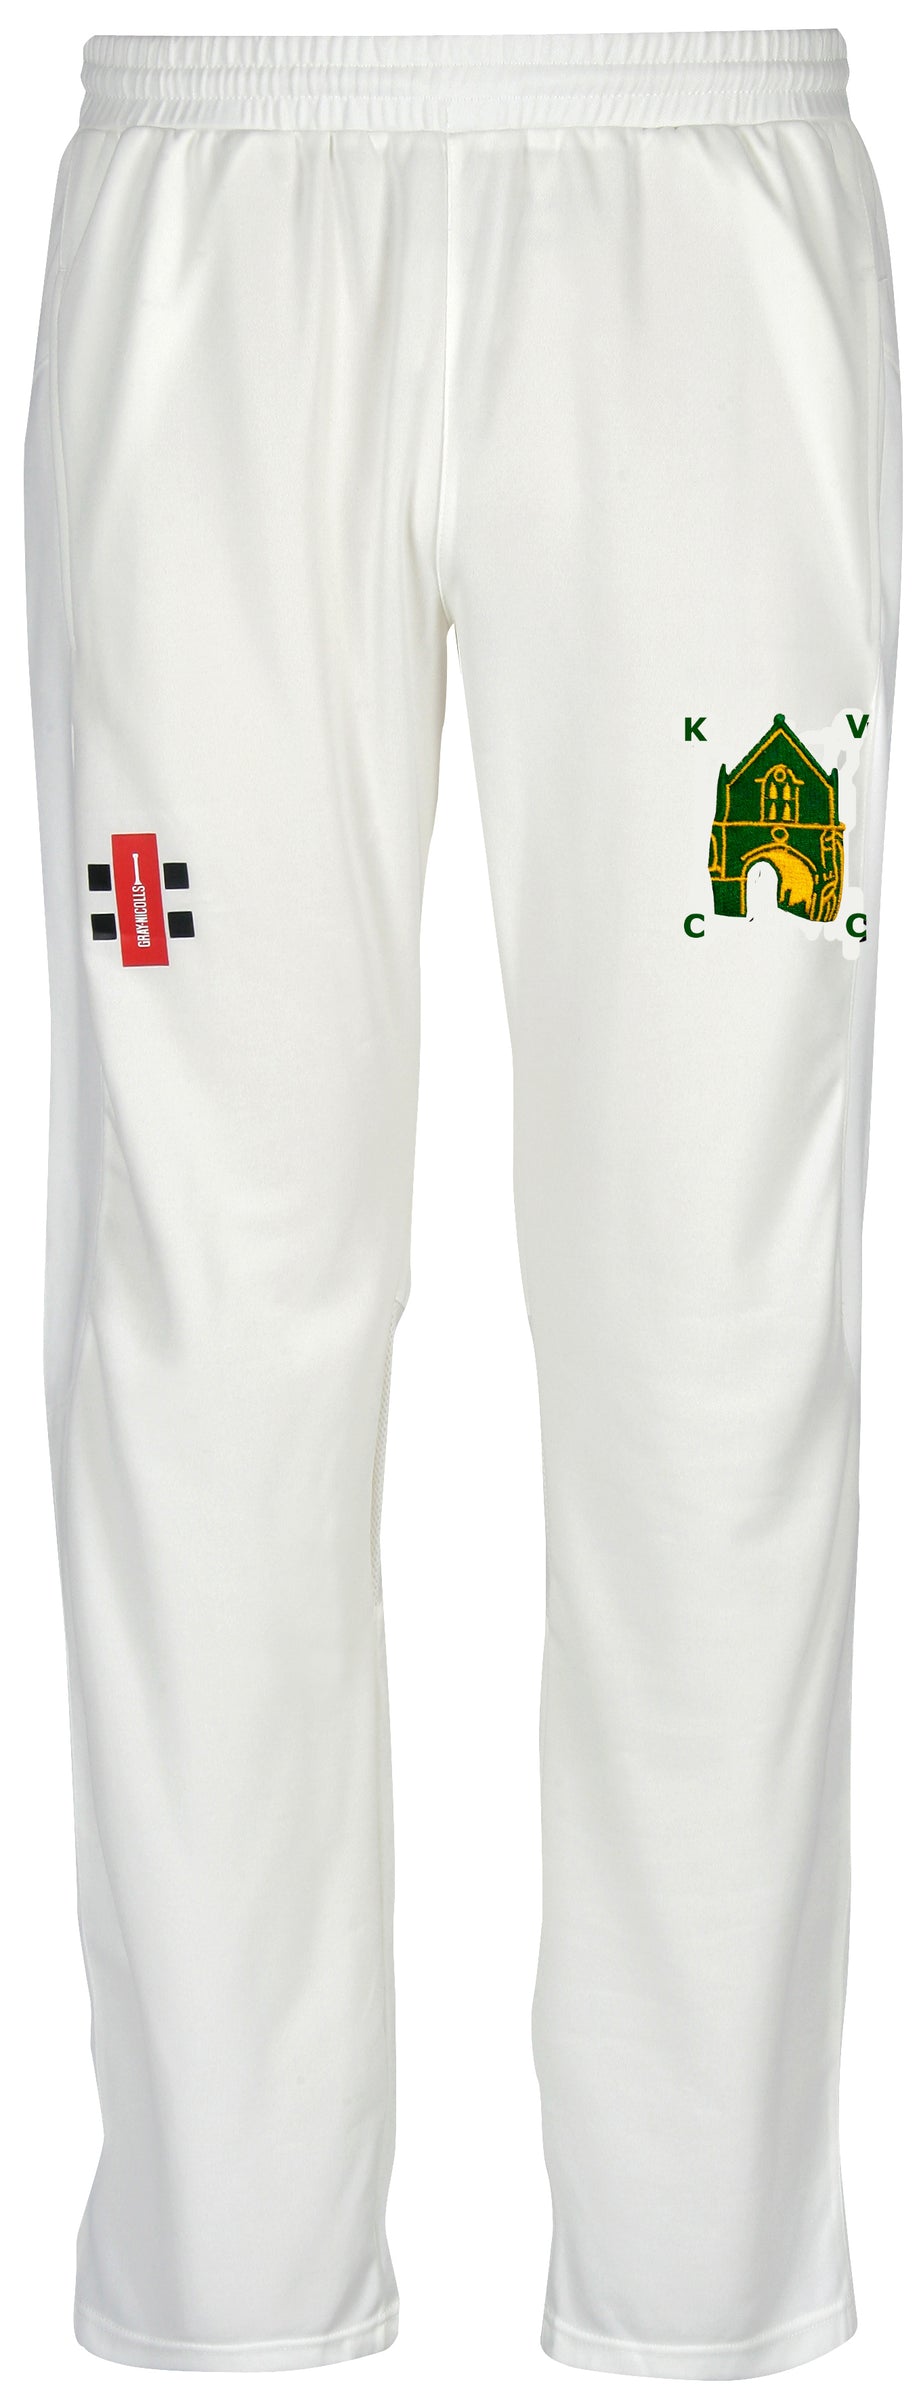 Kingswood Village CC Velocity Cricket Trousers